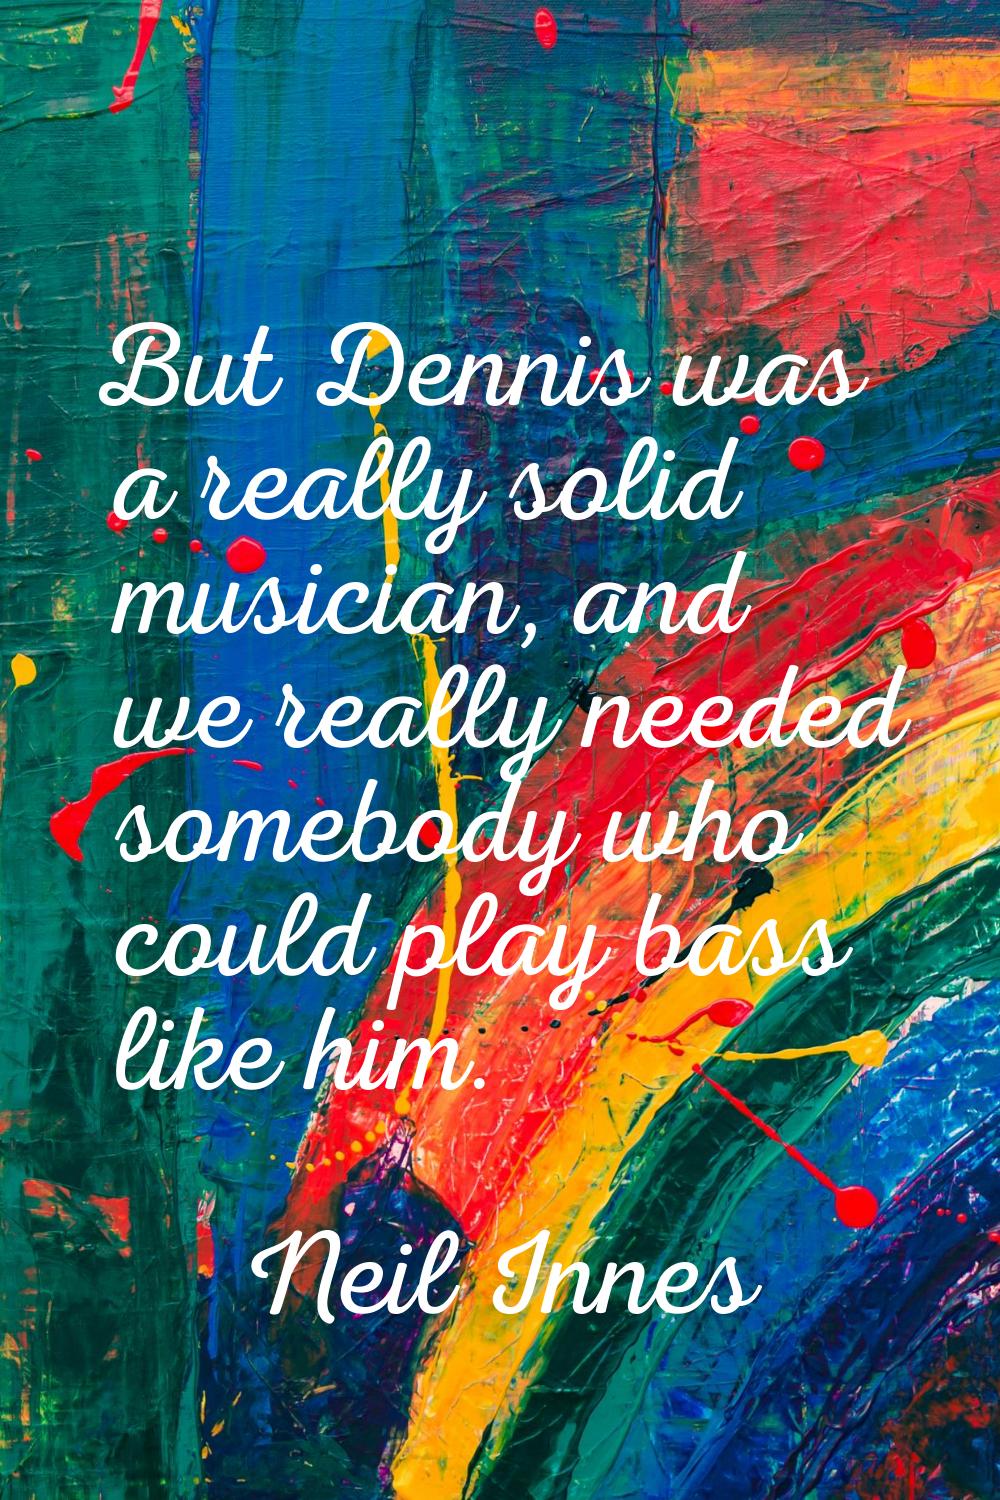 But Dennis was a really solid musician, and we really needed somebody who could play bass like him.